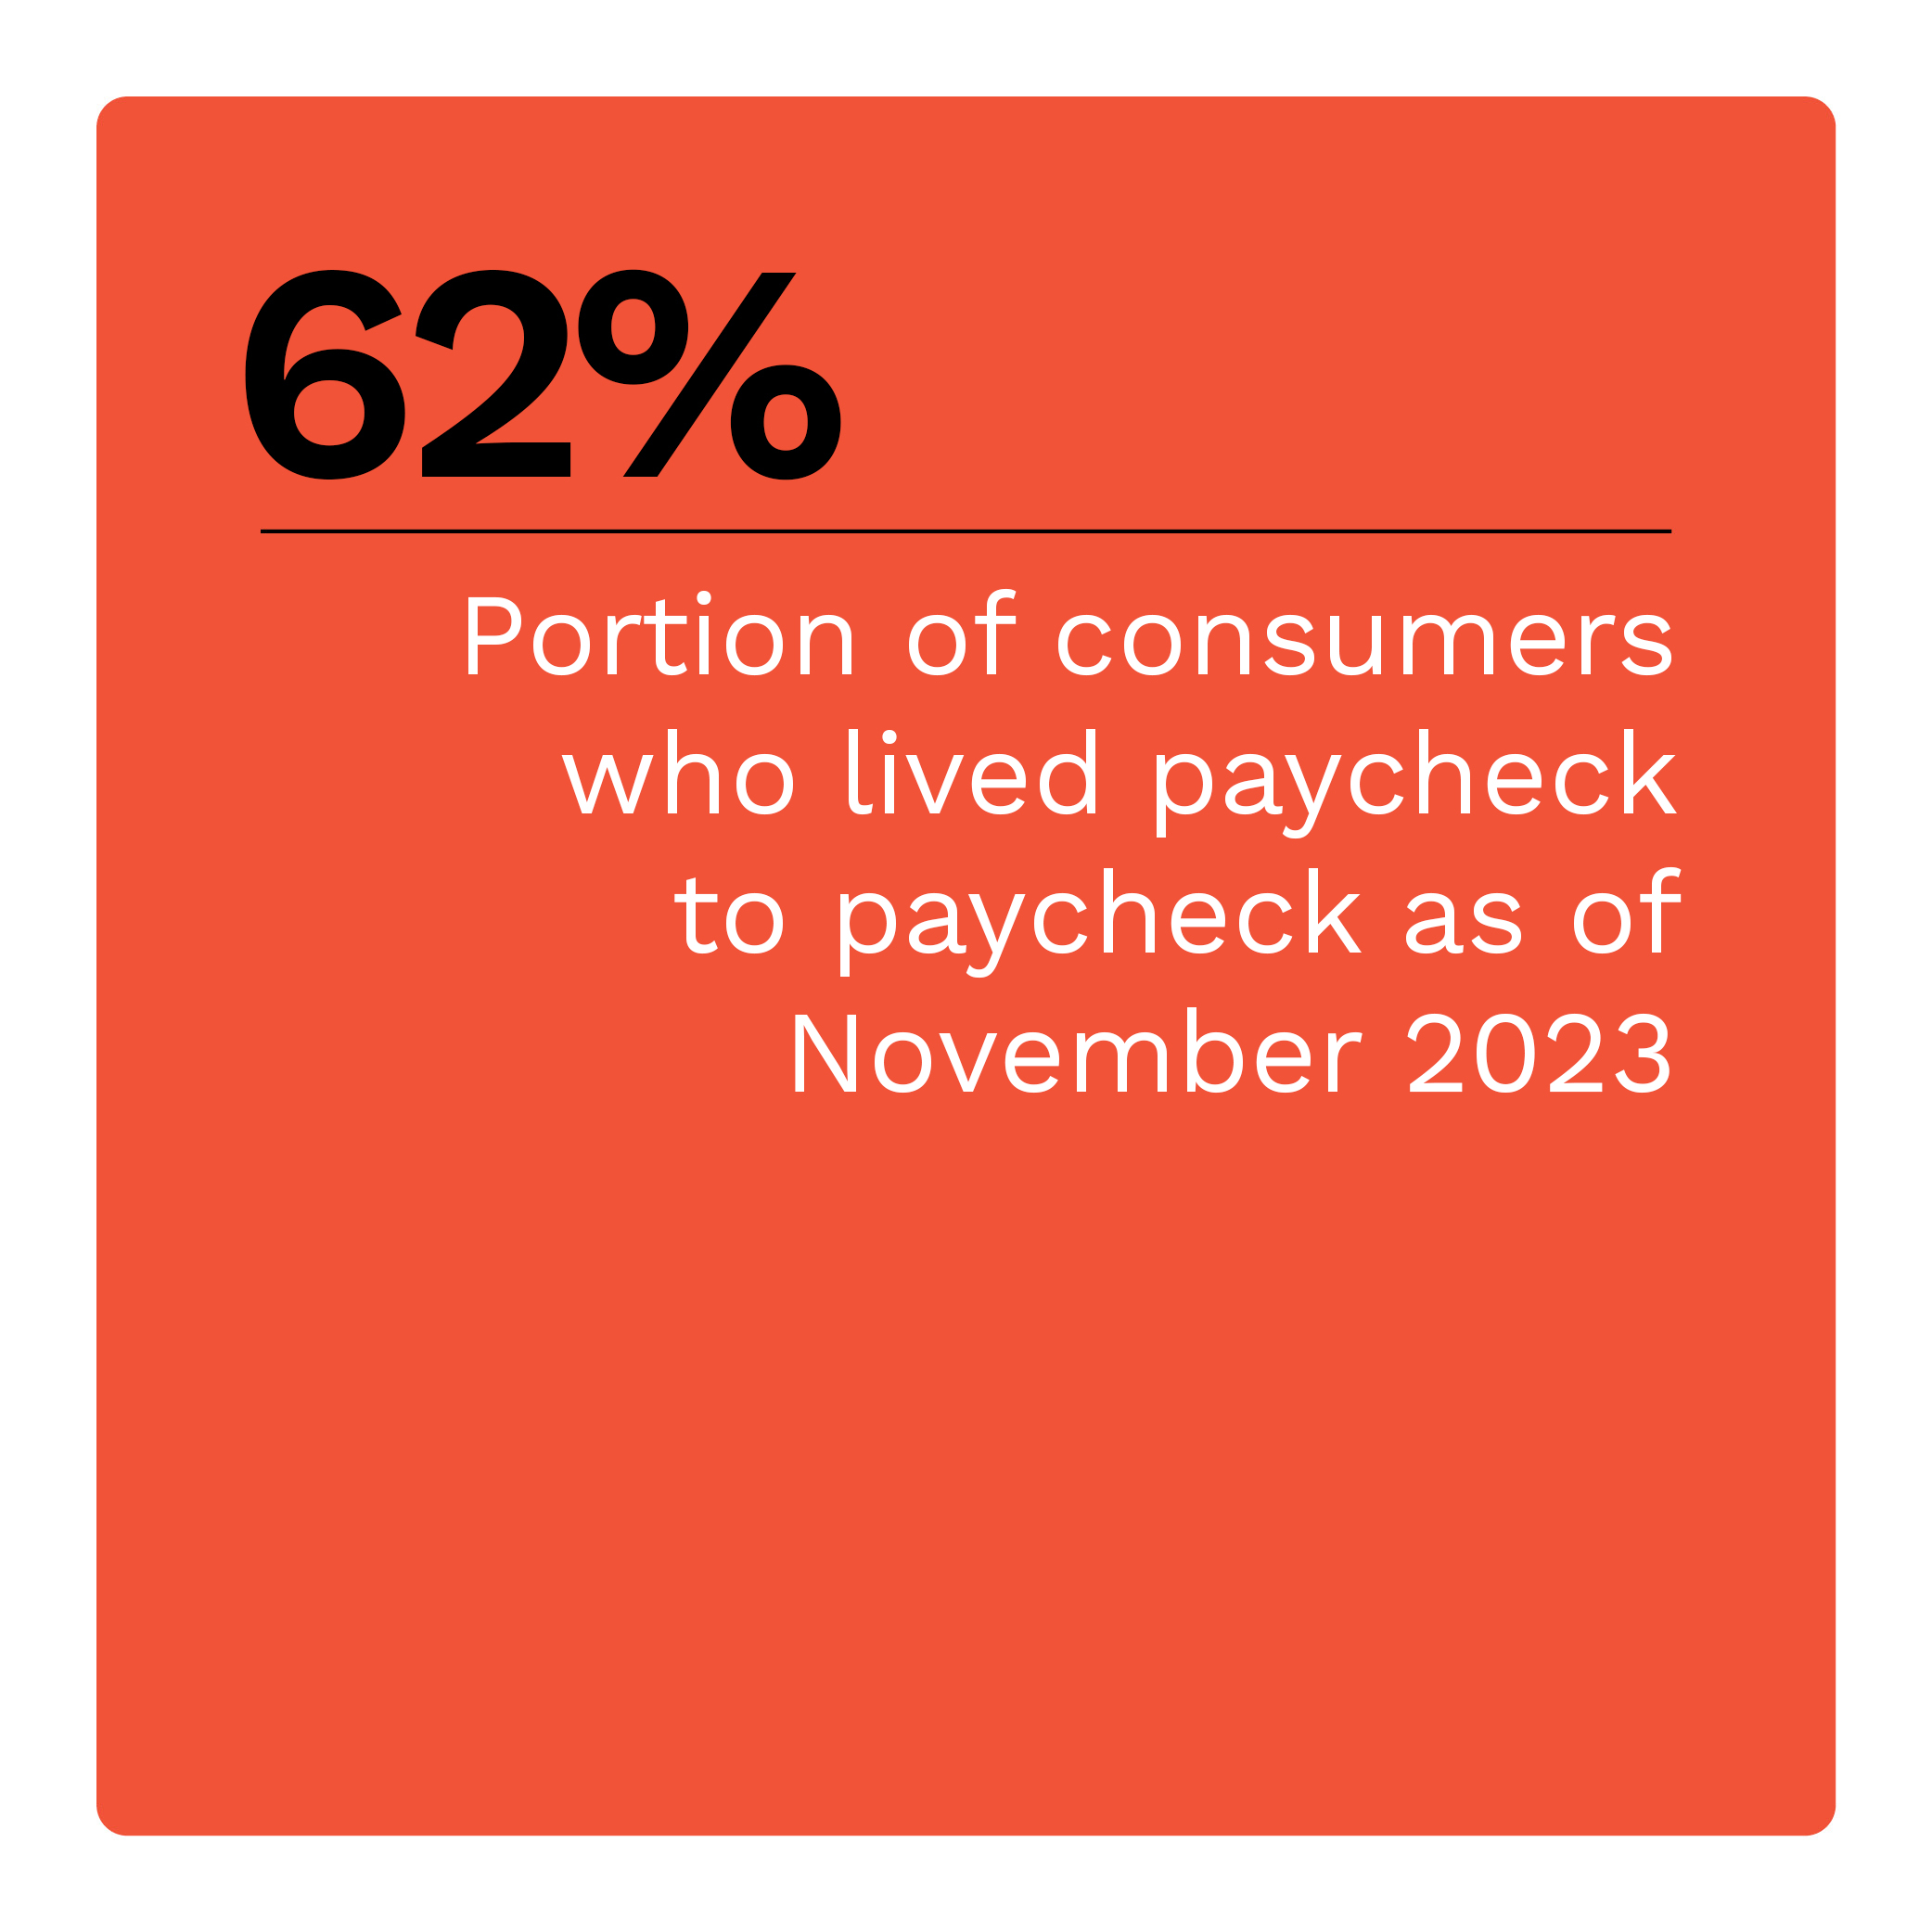 62%: Portion of consumers who lived paycheck to paycheck as of November 2023